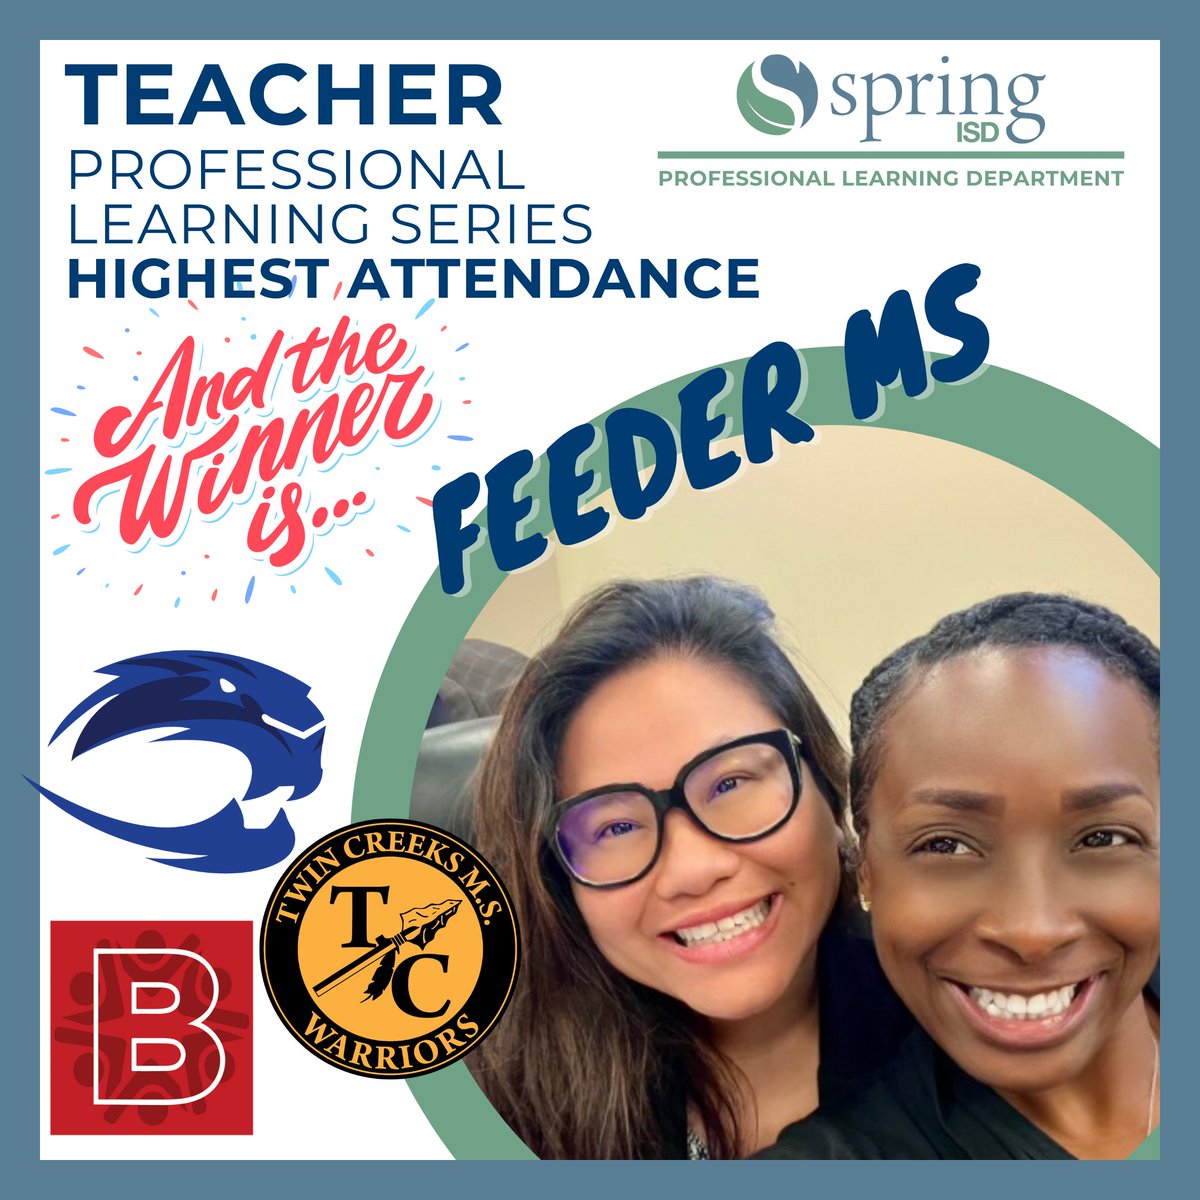 Assistant Superintendent @NirmolLim - Feeder MS is leading the way! Huge shoutout to the Principals for guiding the pack with the highest attendance of teachers on last week's Remote Learning Sessions. Congratulations! #WeAreSpring #Unstoppable